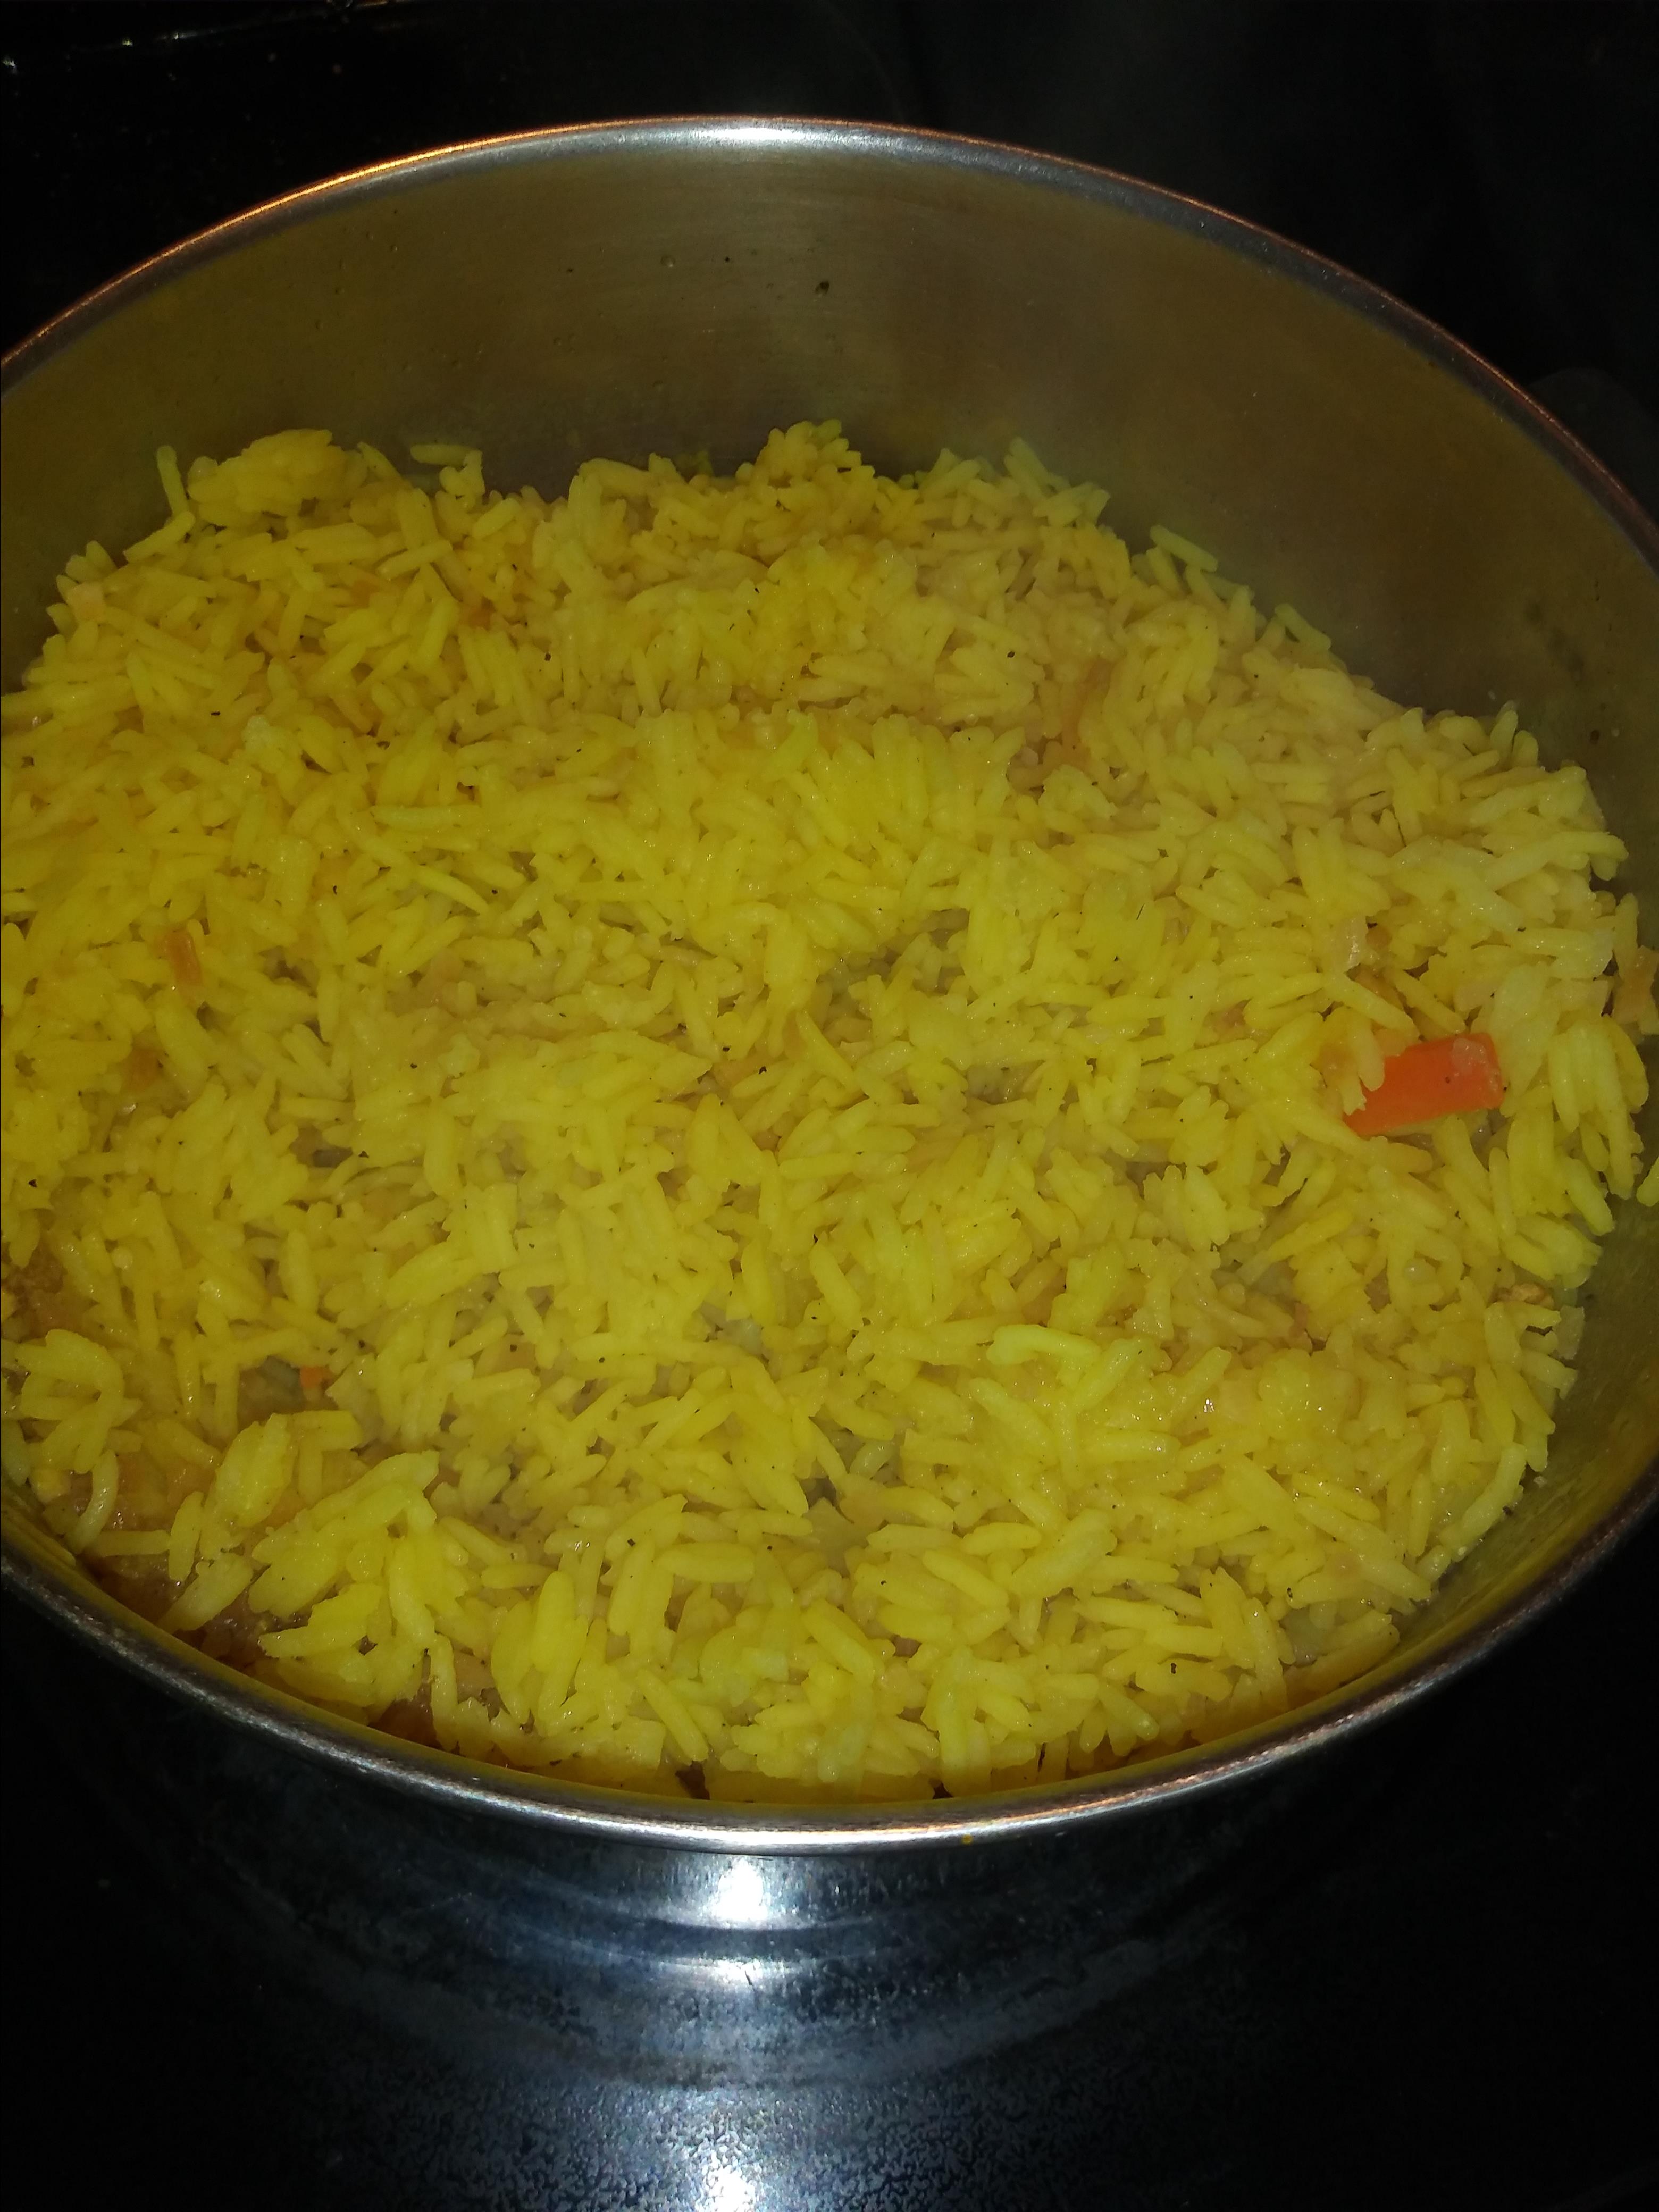 Cindy S Yellow Rice Recipe Allrecipes,Ham Hock And Beans Nutrition